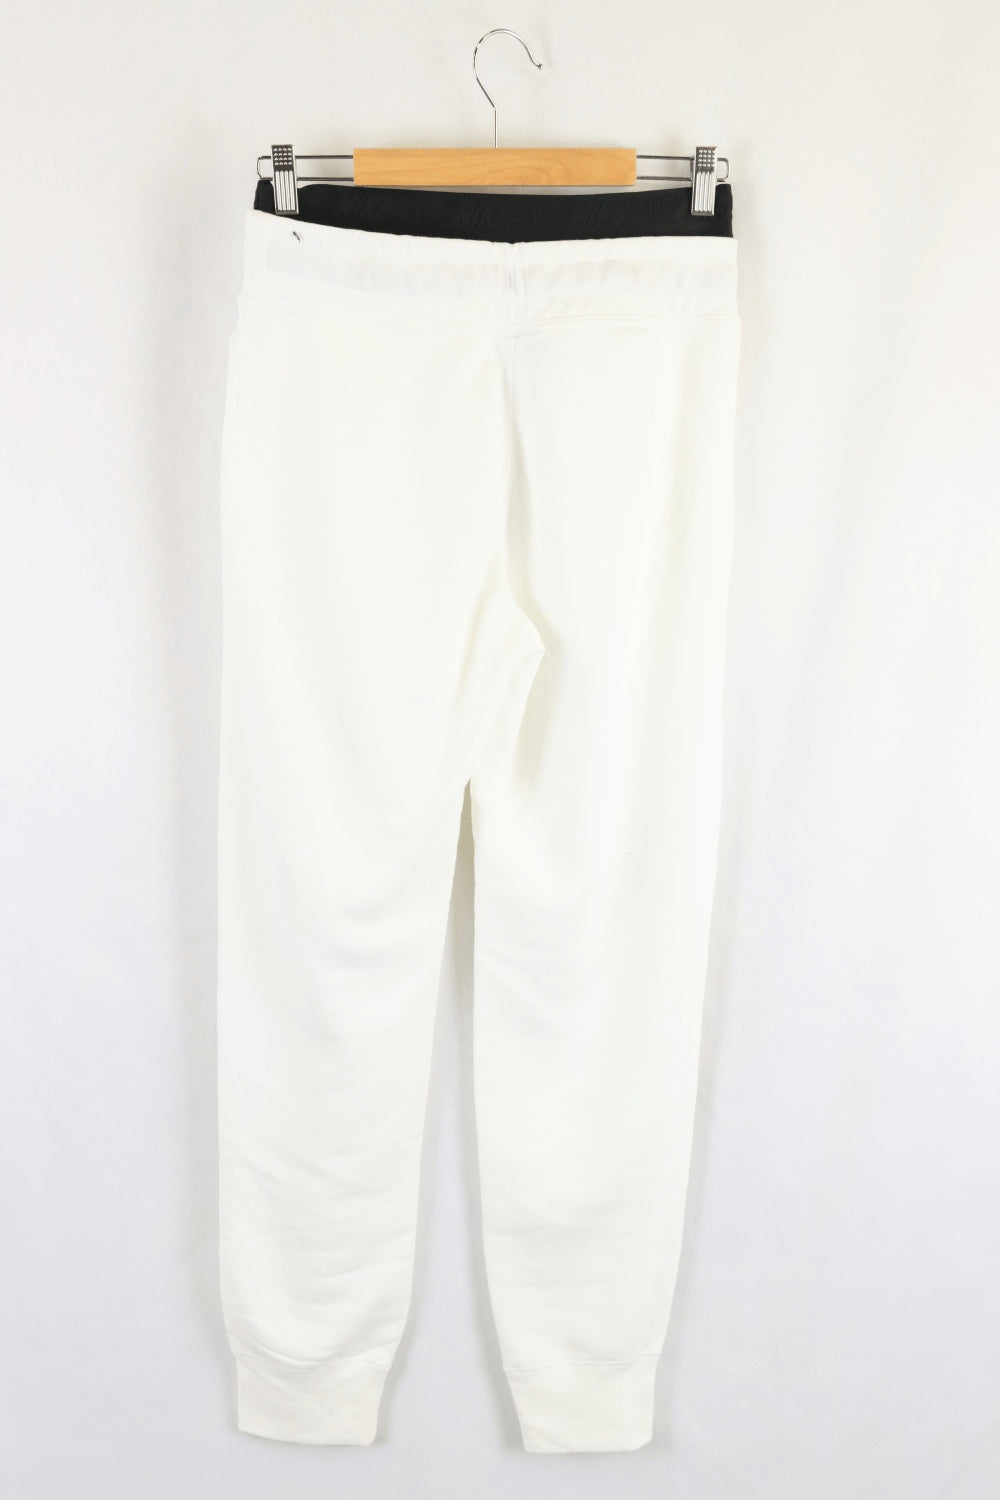 Nike Air White Tracksuit Pants S